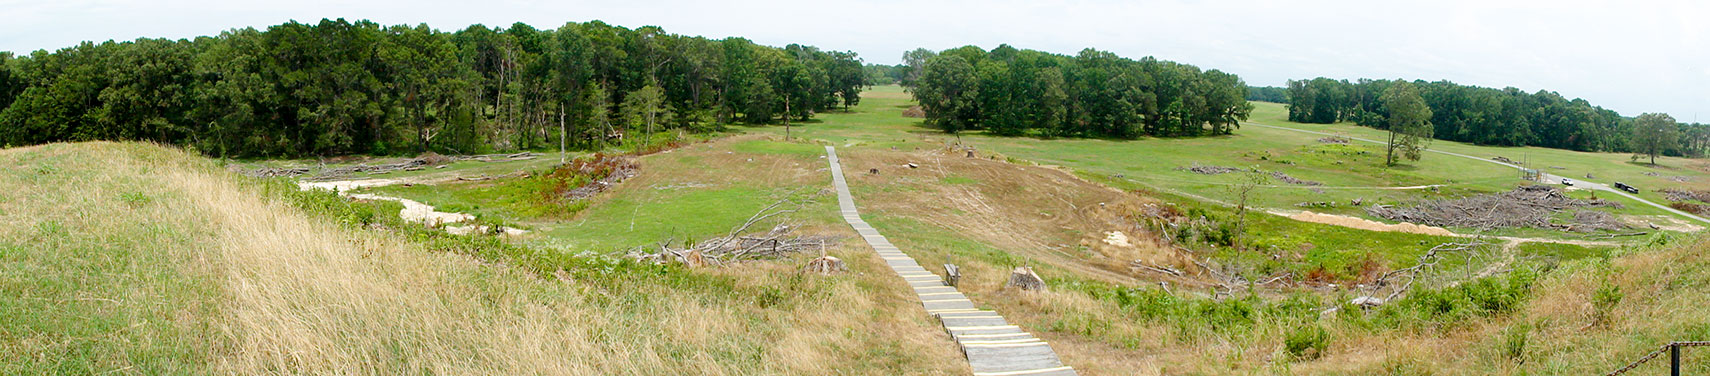 Panorama from the top of Mound A at Poverty Point Historic Park.